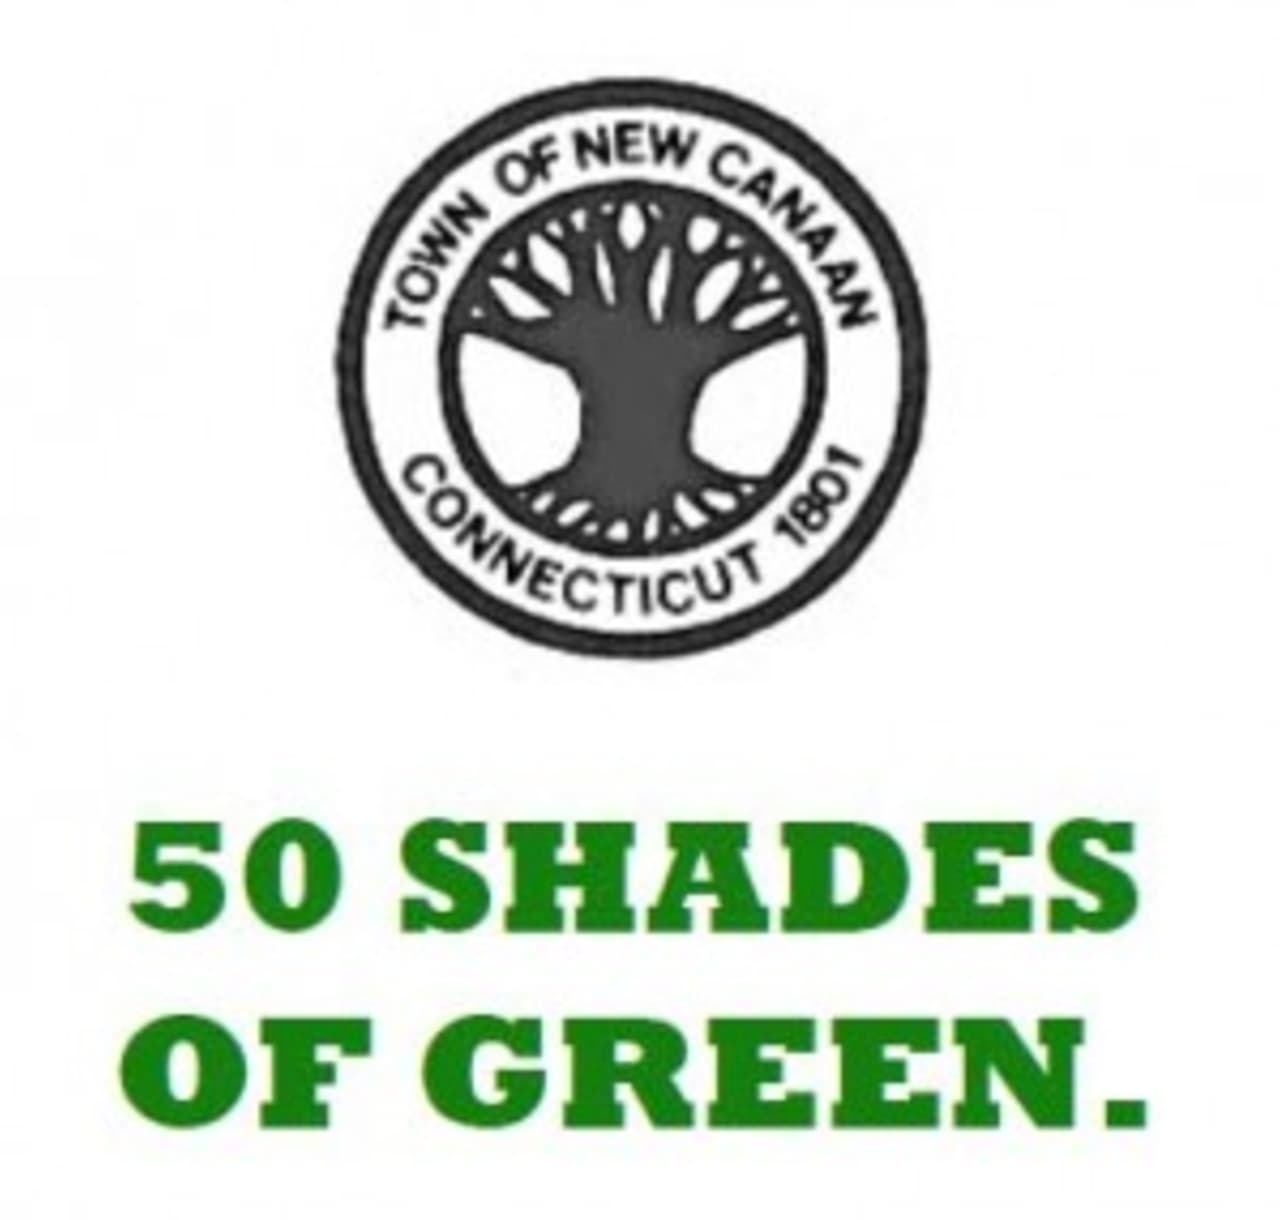 The "50 Shades of Green" logo being used by the New Canaan Conservation Commission. 